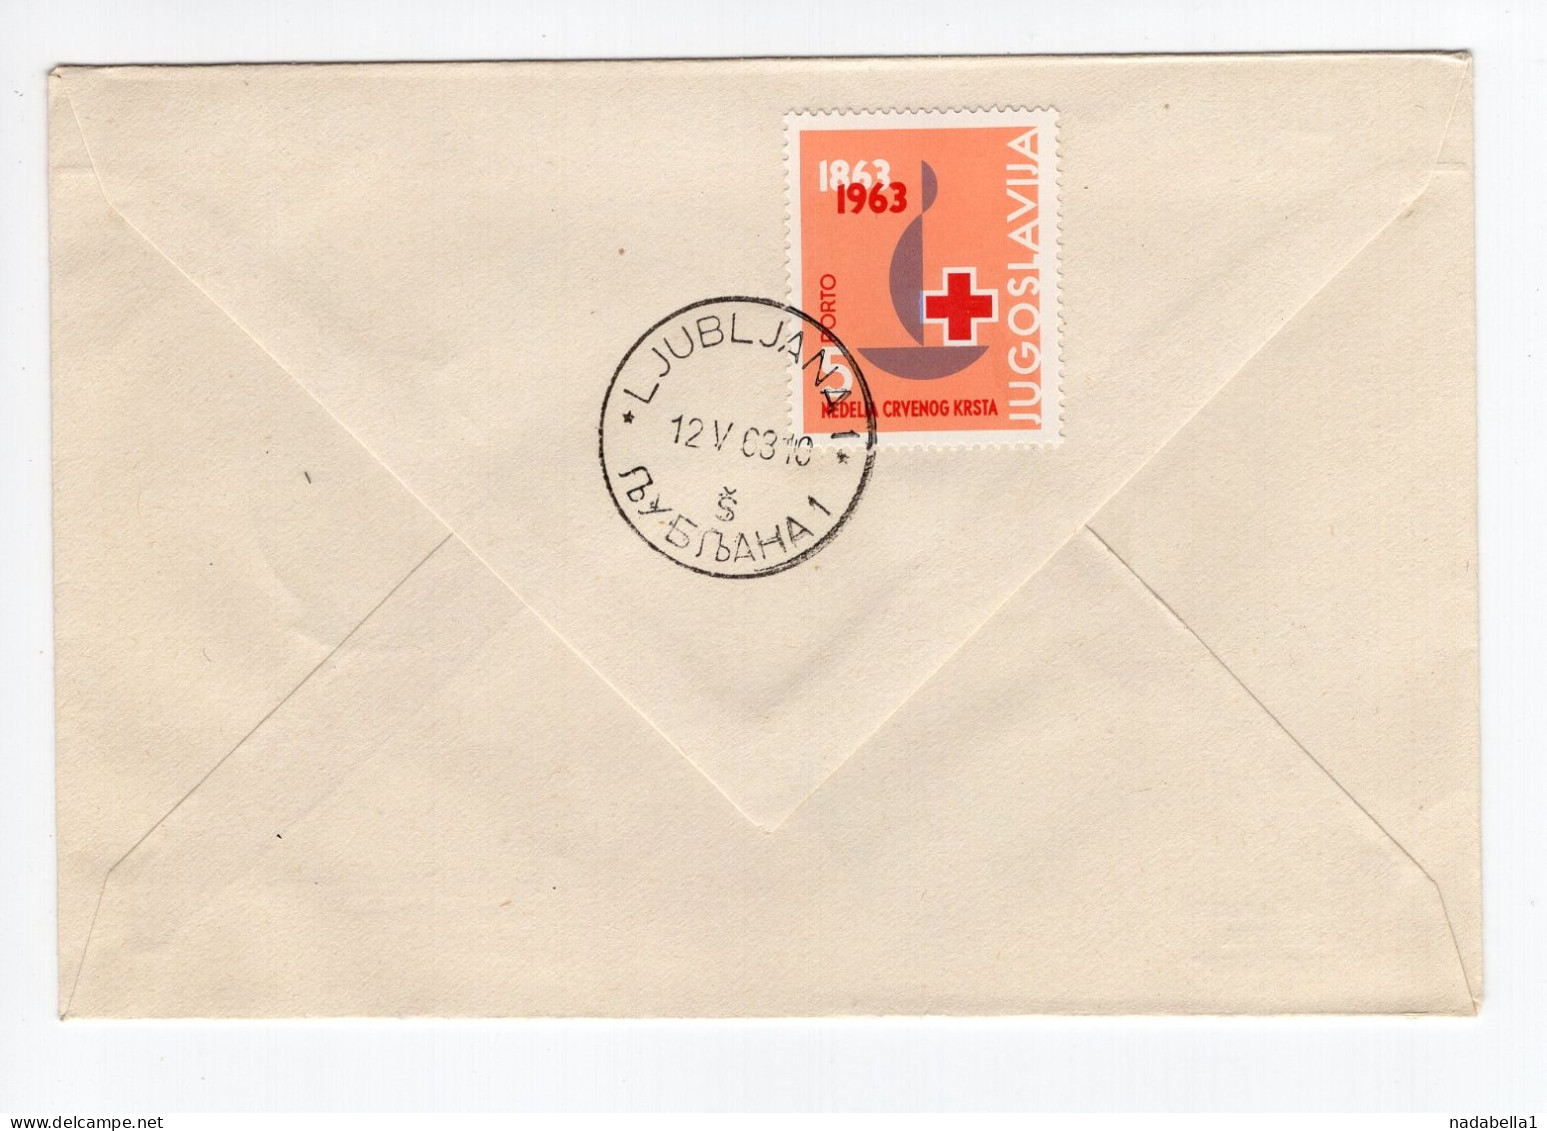 1963. YUGOSLAVIA,SLOVENIA,IDRIJA,RELAY STATION,PARTIZAN COURIERS,SPECIAL COVER AND CANCELLATION,RED CROSS - Lettres & Documents